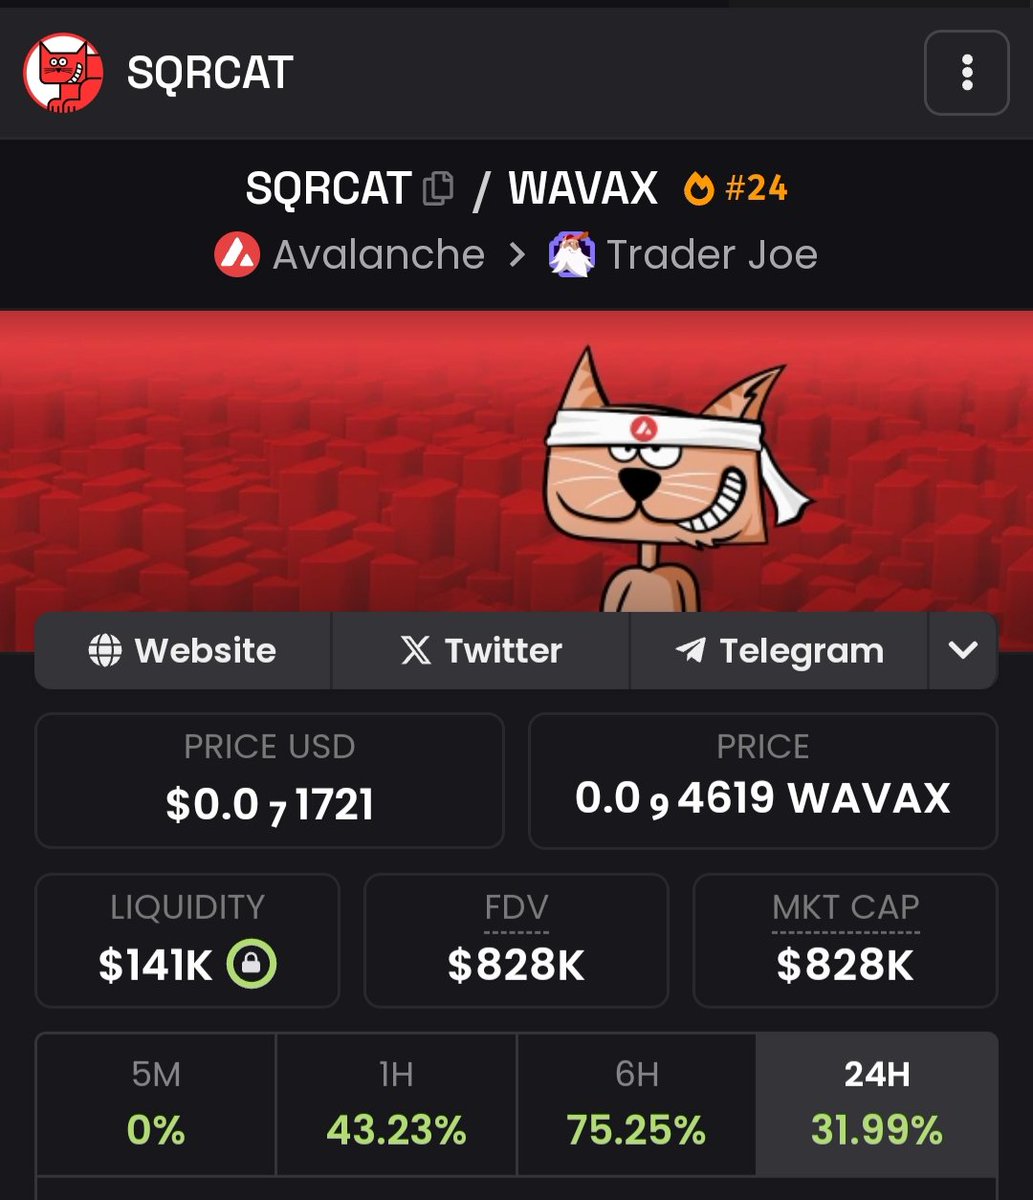 $SQRCAT
This Cat Have 18 Lives...
Yes 18... And It's Green Again... Up By 32%

🔺️🐈🔺️🐈🔺️🐈🔺️🐈🔺️🐈🔺️🐈
#SQRCAT @sqrcat4avax #AVAX